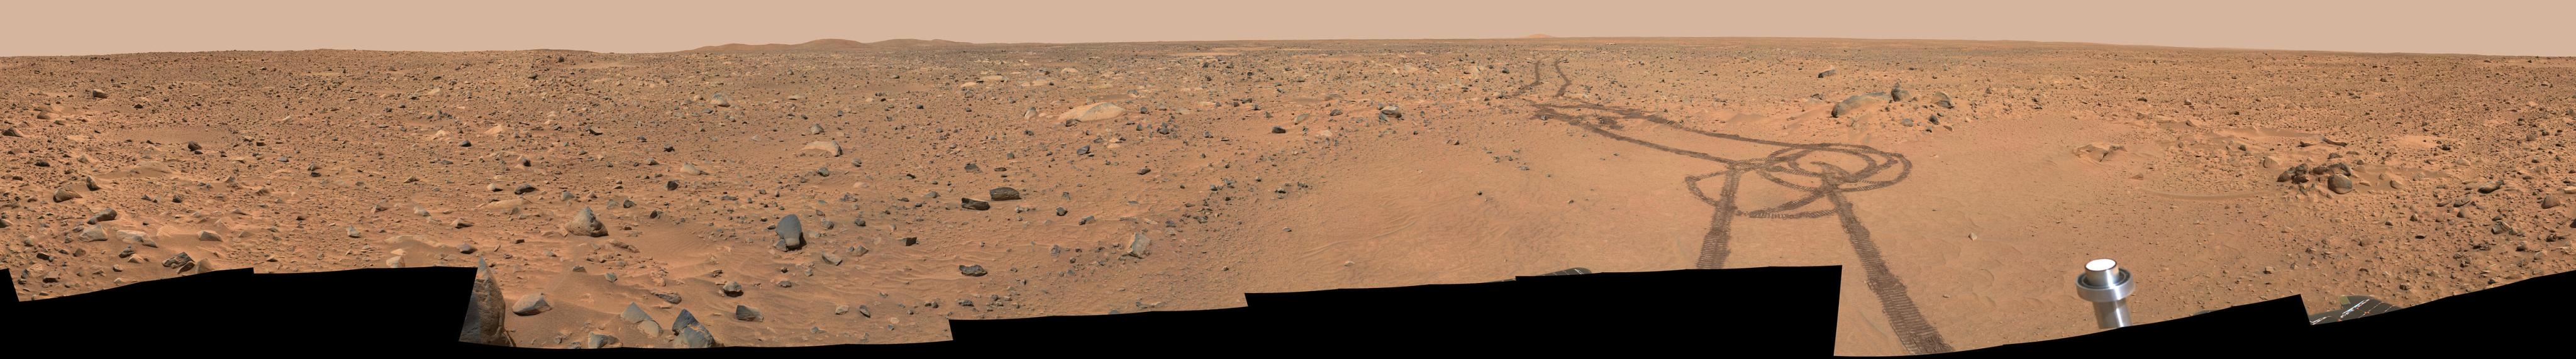 This view captured by Spirit called "Legacy" panorama, combines images taken between the landing site and the rim of "Bonnevile Crater."